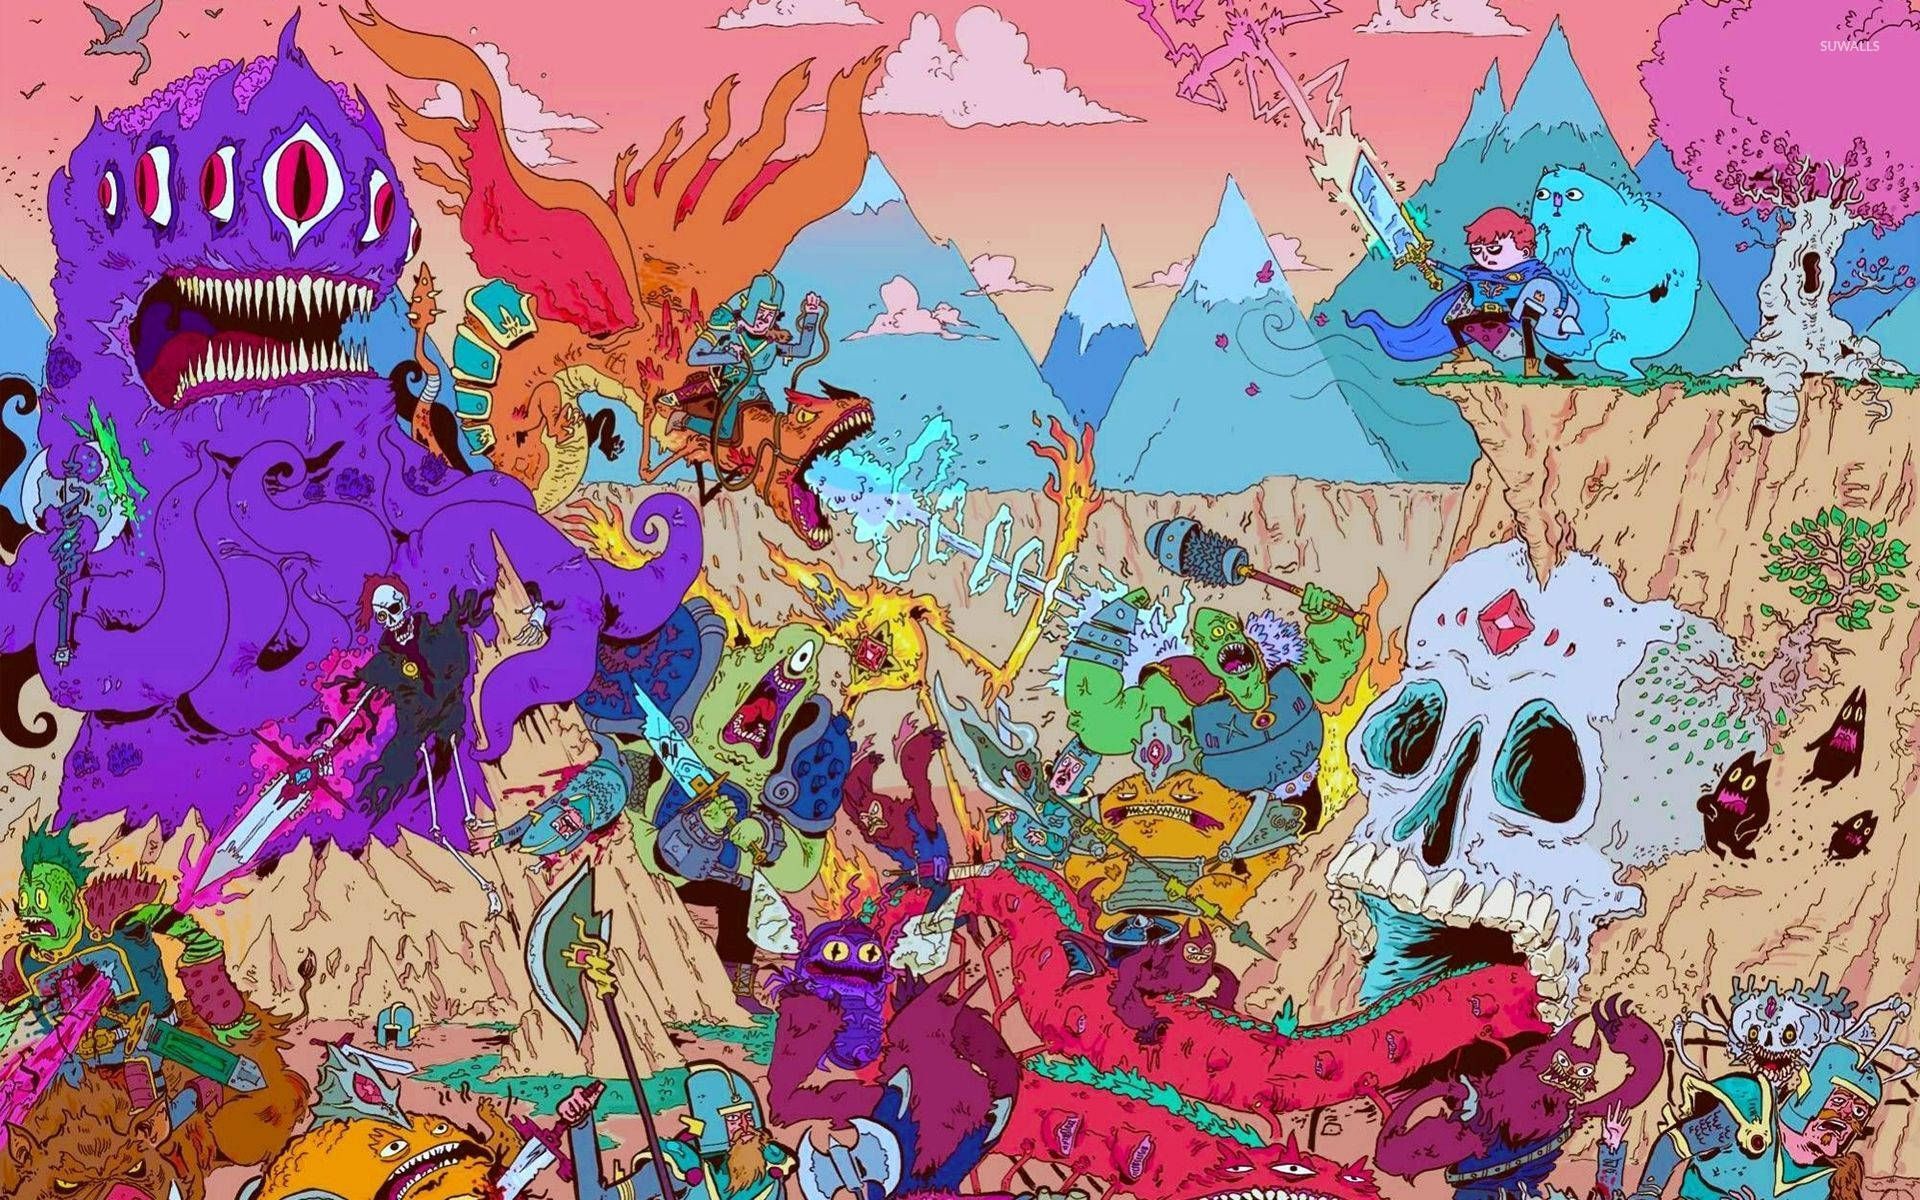 A colorful illustration of a mountain landscape with characters from the show, including Finn, Jake, and Princess Bubblegum, fighting monsters and riding dragons. - Adventure Time